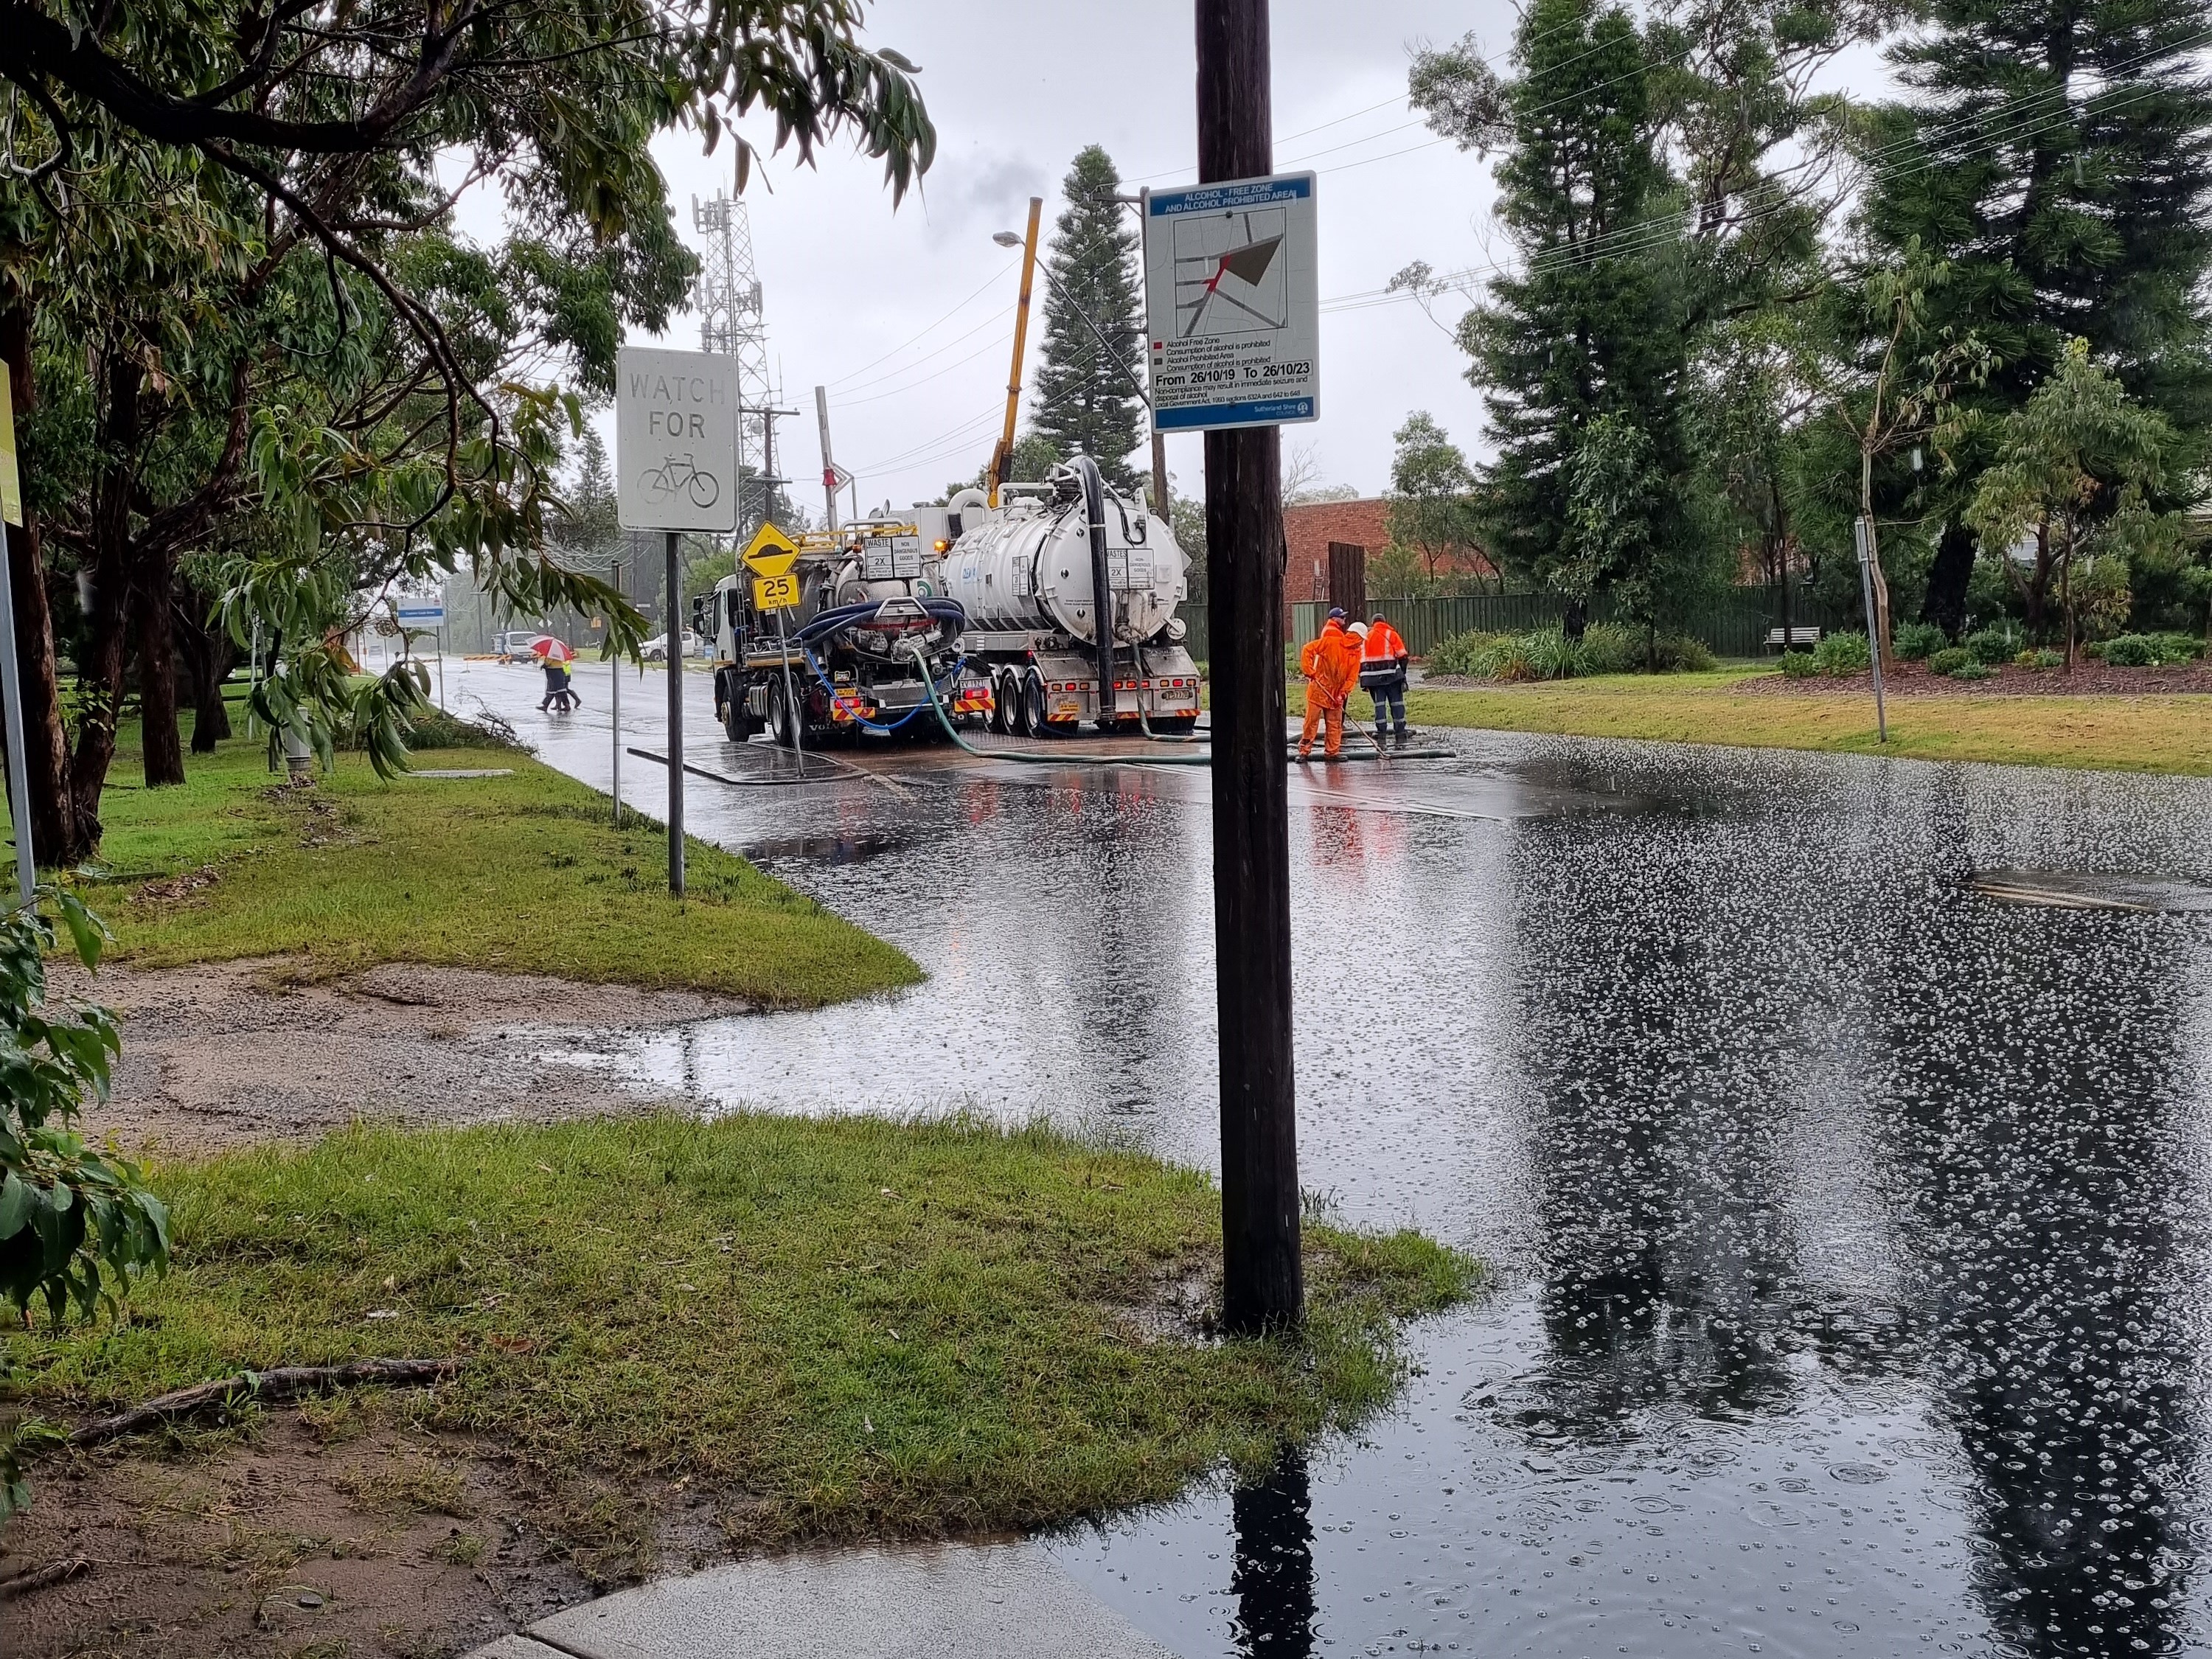 Oily floodwaters overflowing a street in Kurnell as rain falls and a truck pumps the water away